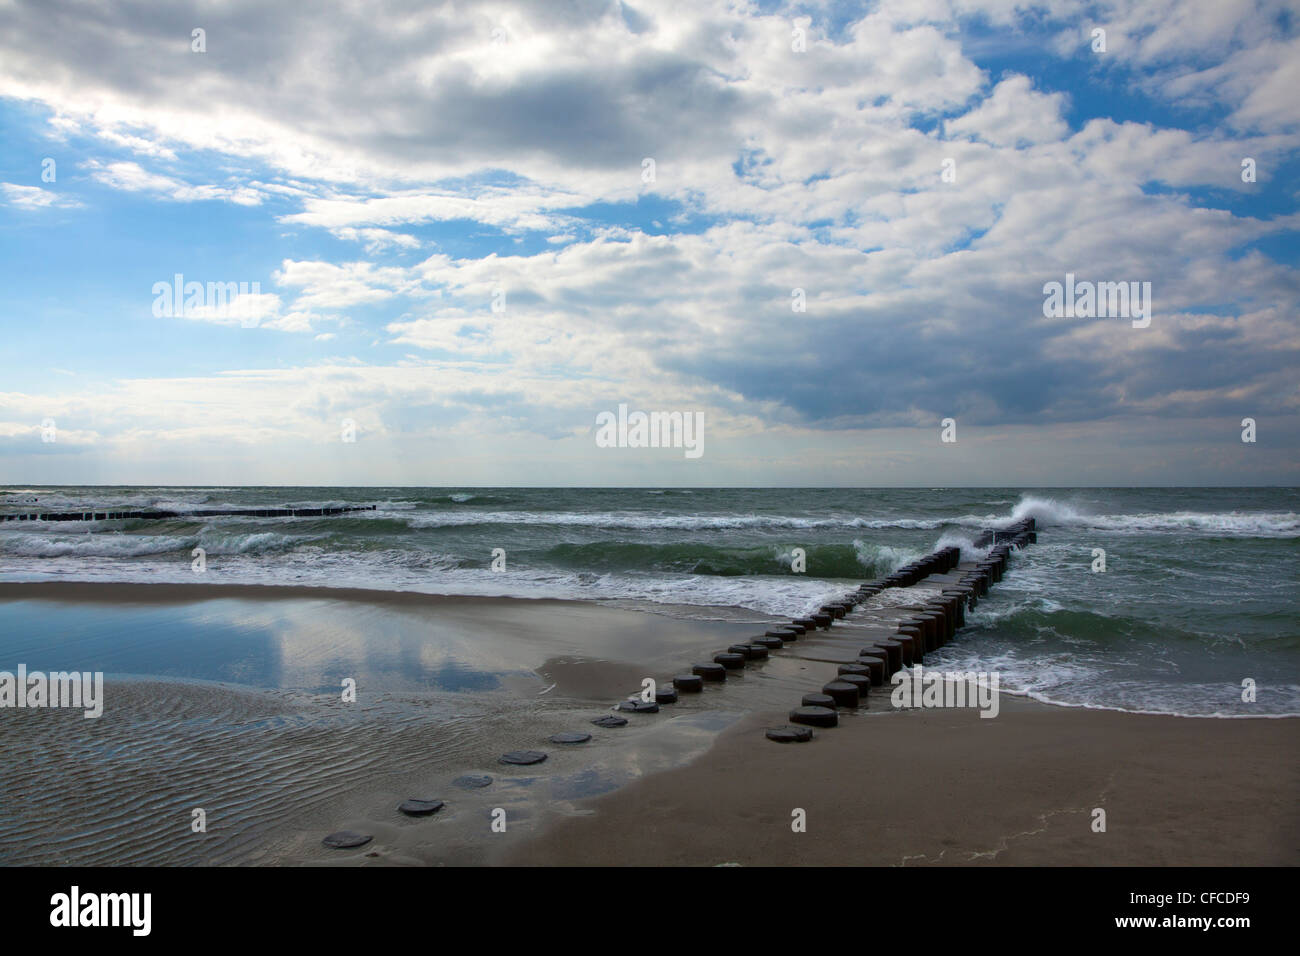 Wave breakers on the beach, Ahrenshoop, Fischland-Darss-Zingst, Baltic Sea, Mecklenburg-West Pomerania, Germany Stock Photo